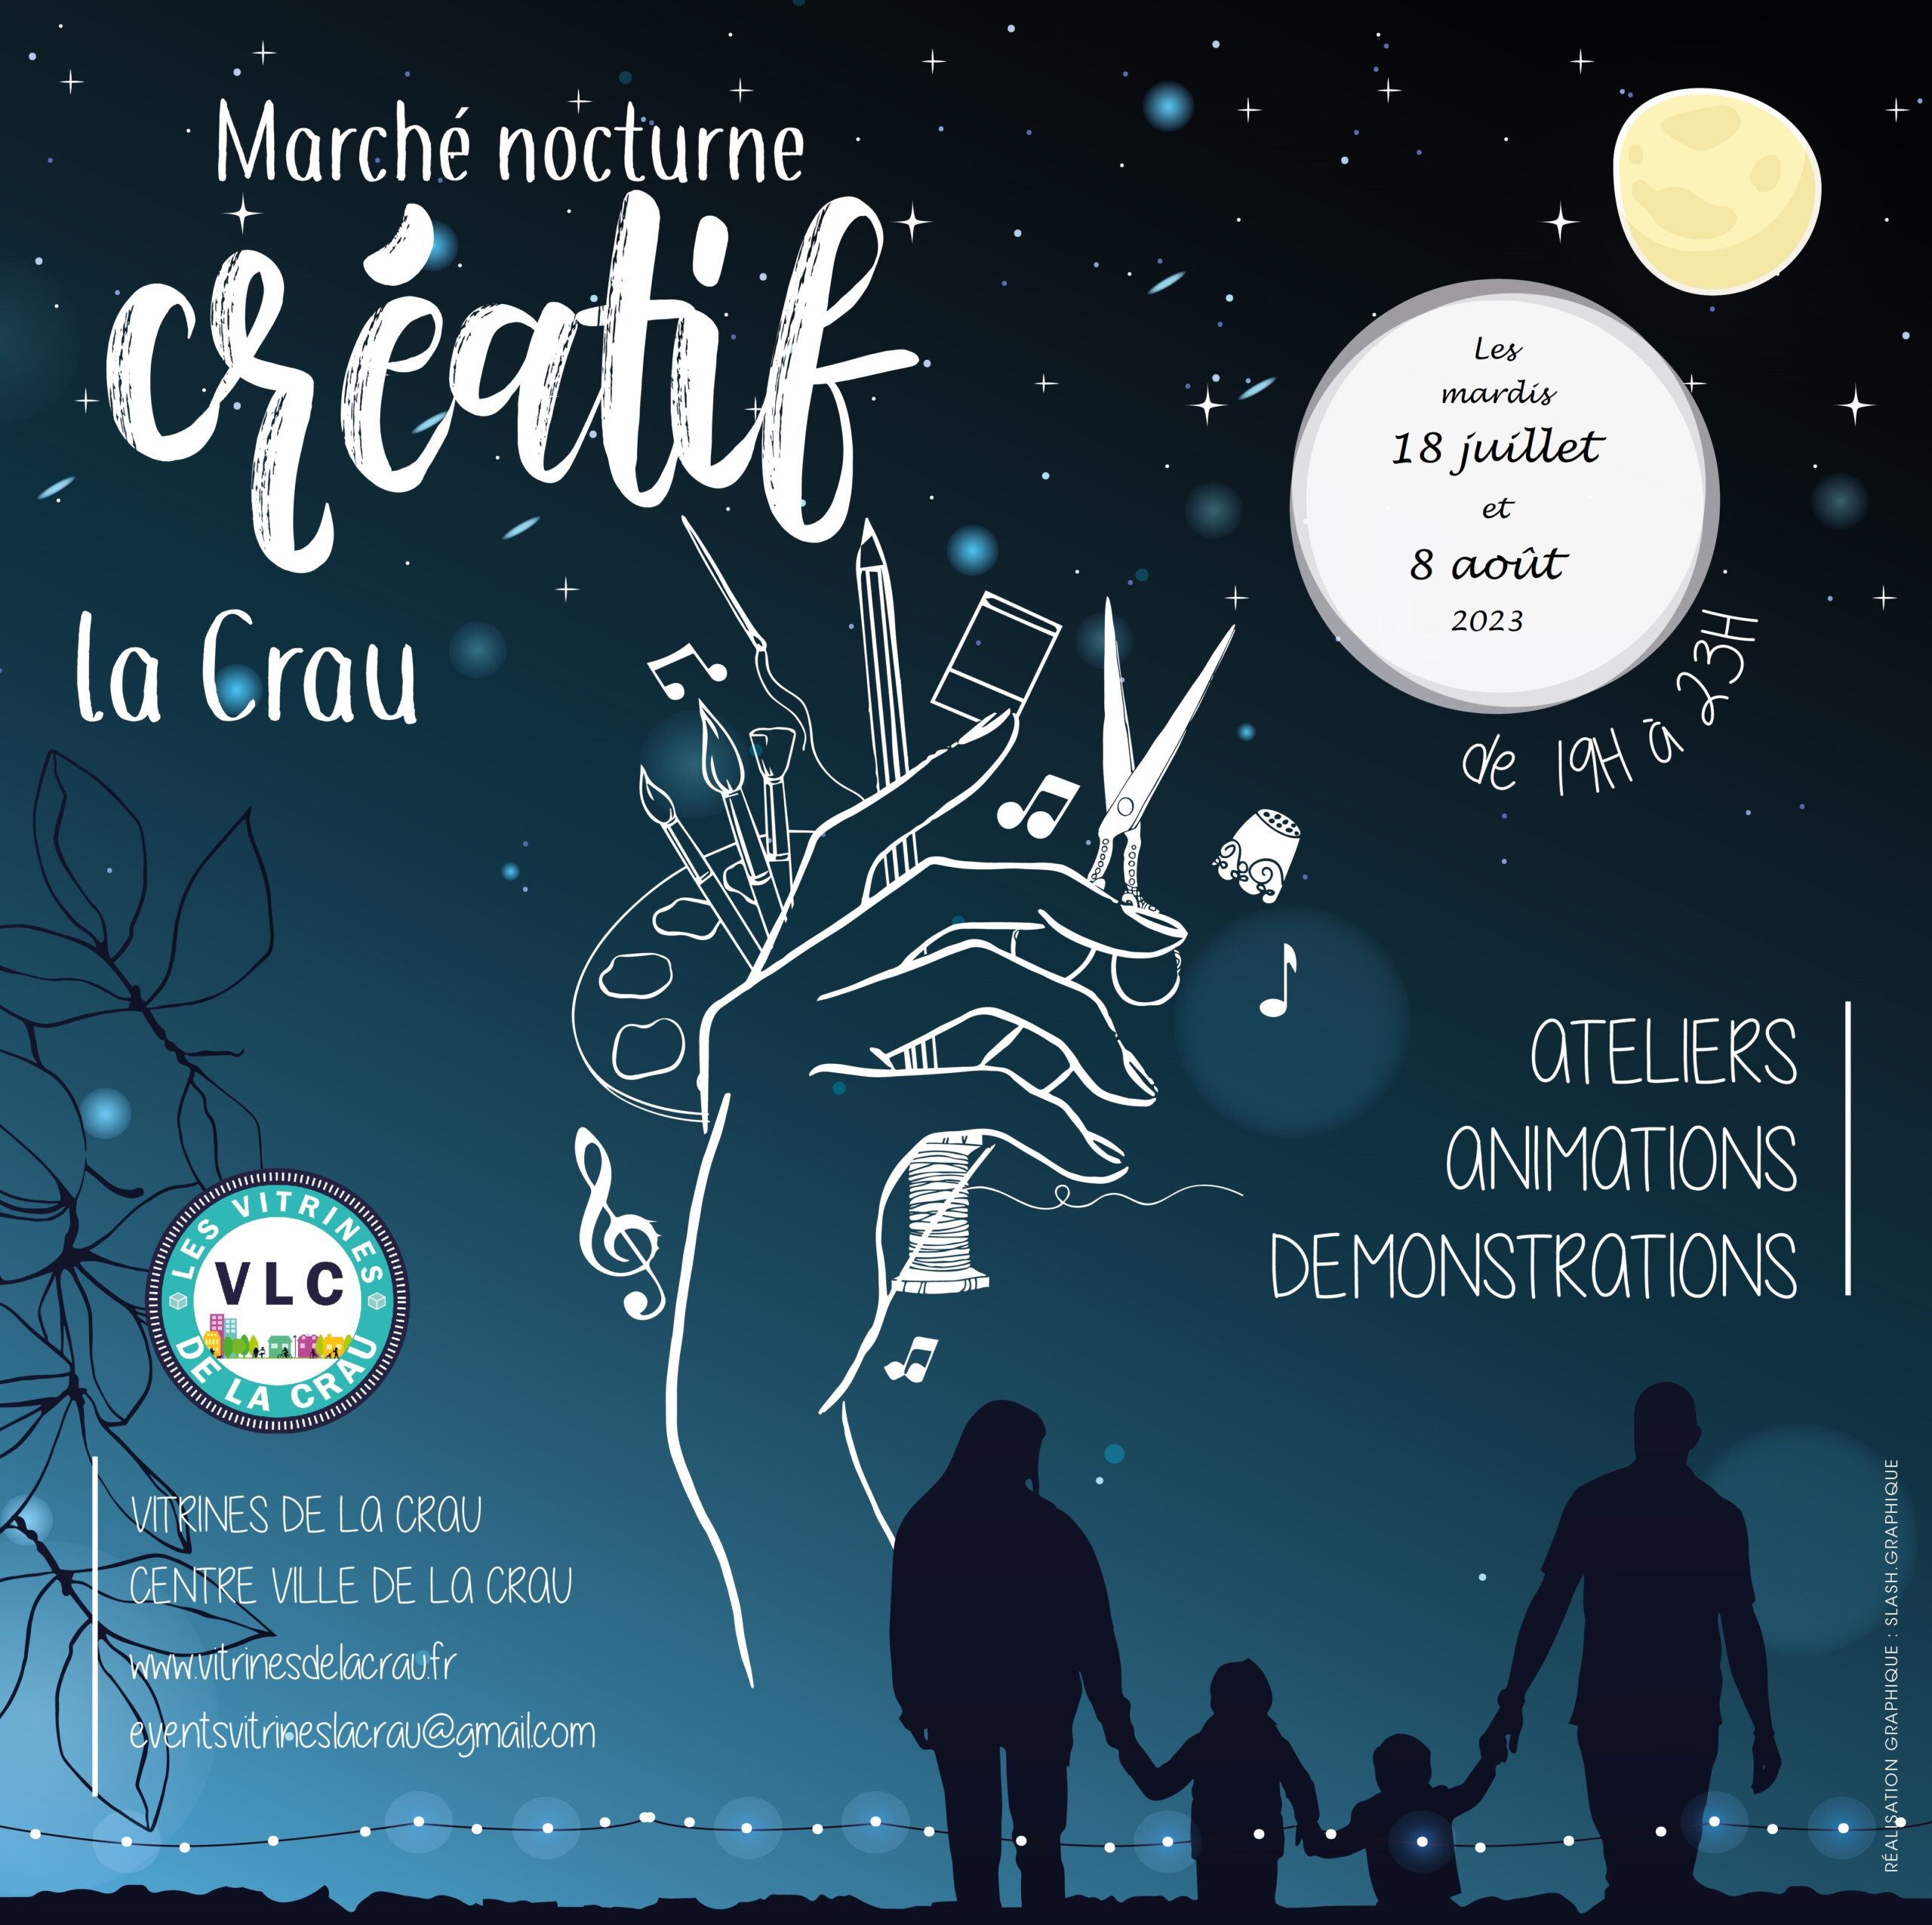 You are currently viewing Mardi 8 août 2023 – Marché nocturne